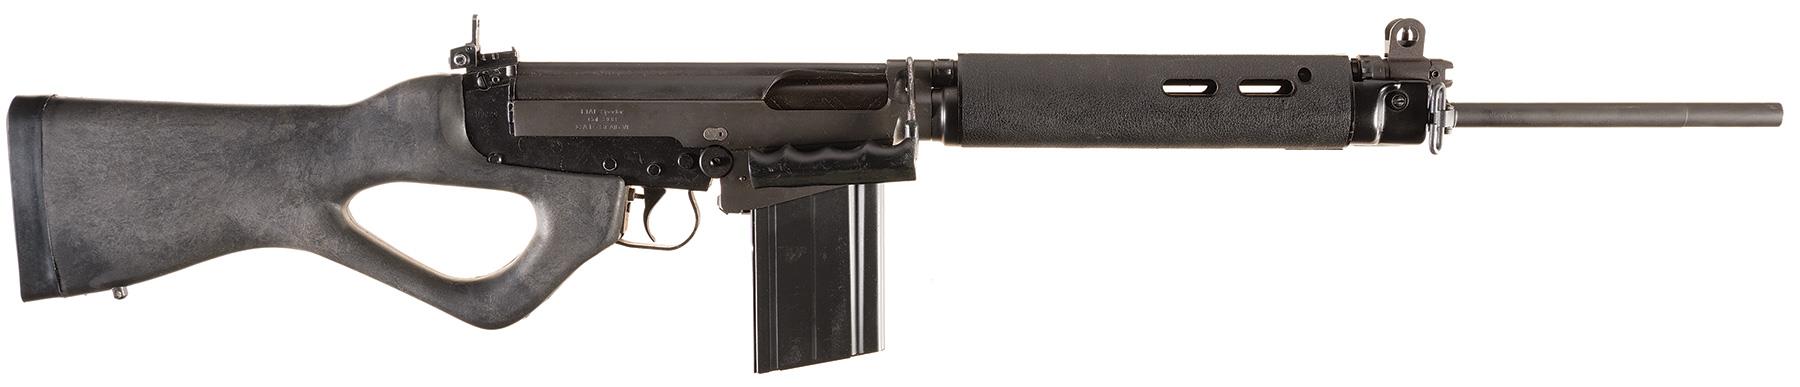 century arms l1a1 serial numbers